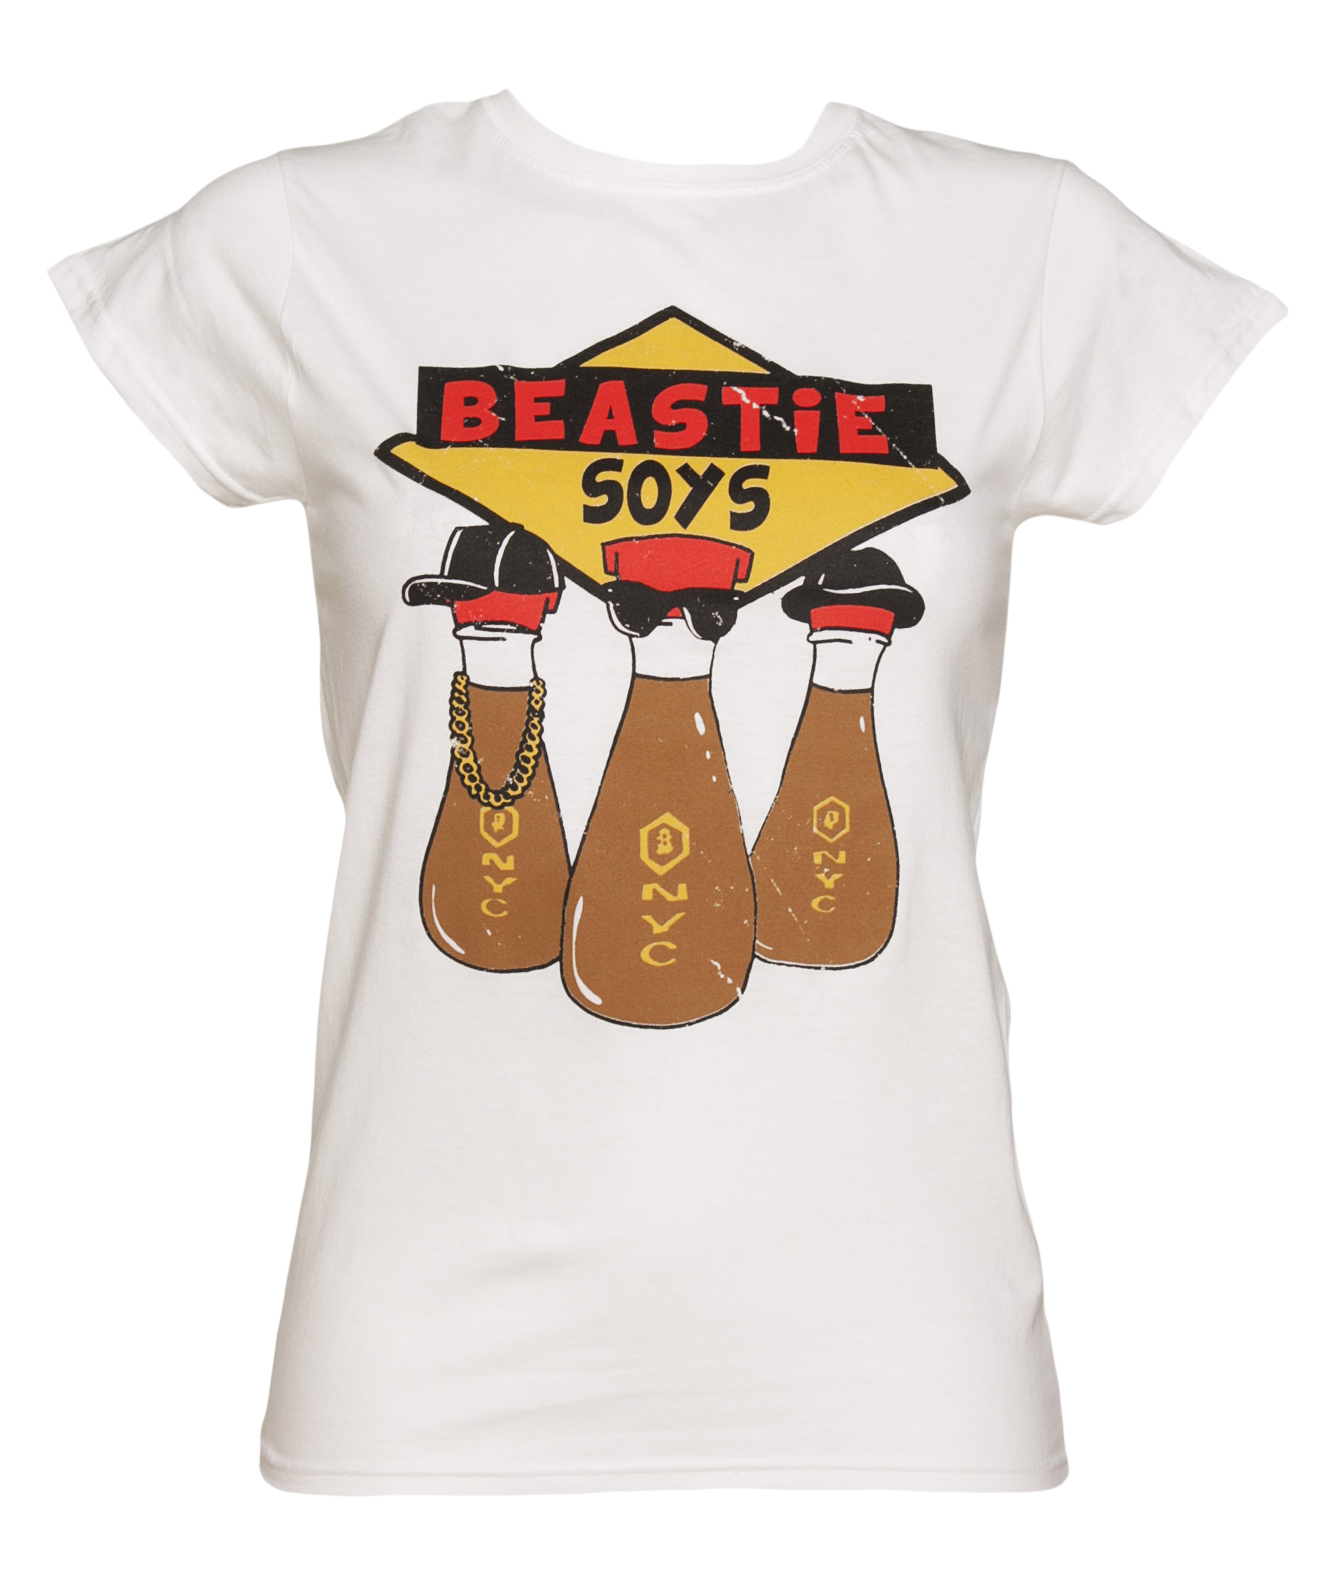 Cool Toons Ladies White Beastie Soys T-Shirt from Cool Toons